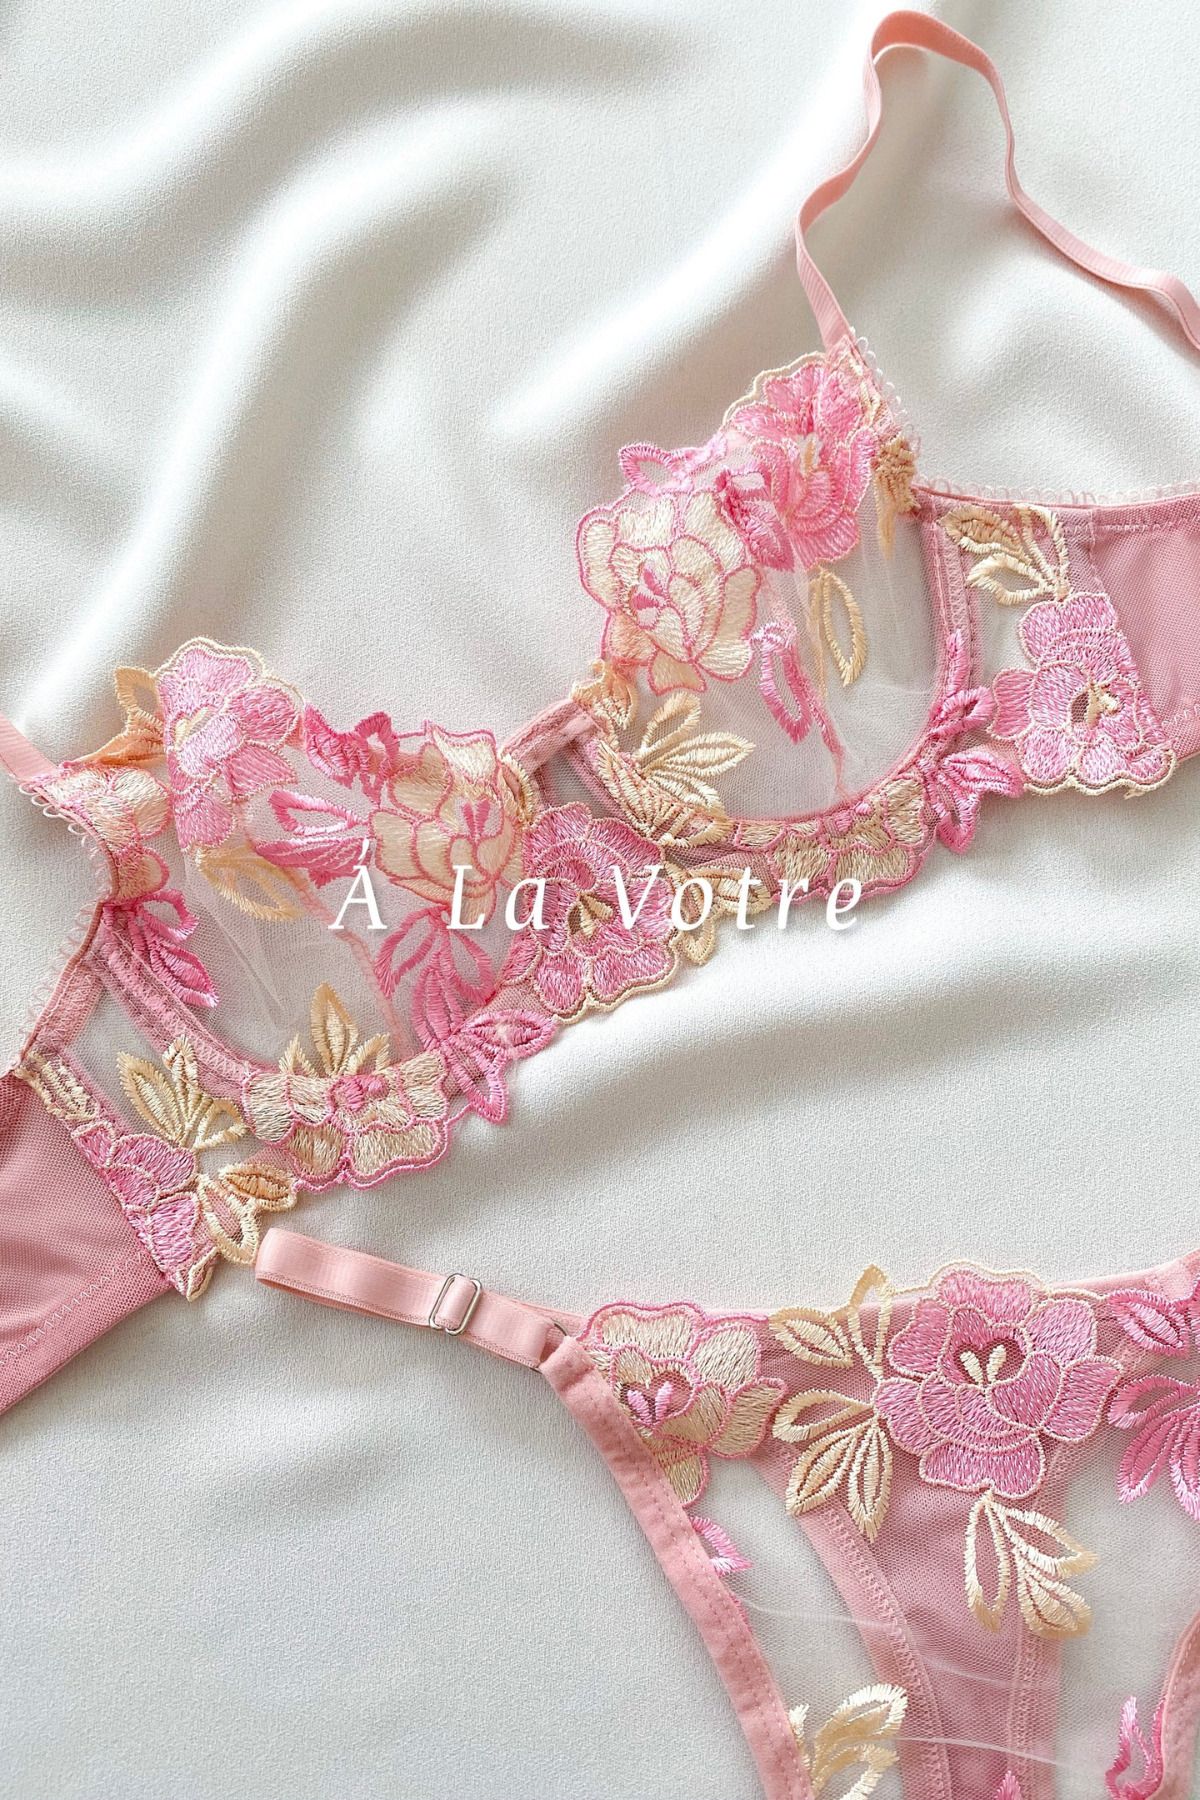 Is That The New Embroidered Floral Sheer Mesh Lingerie Set ??